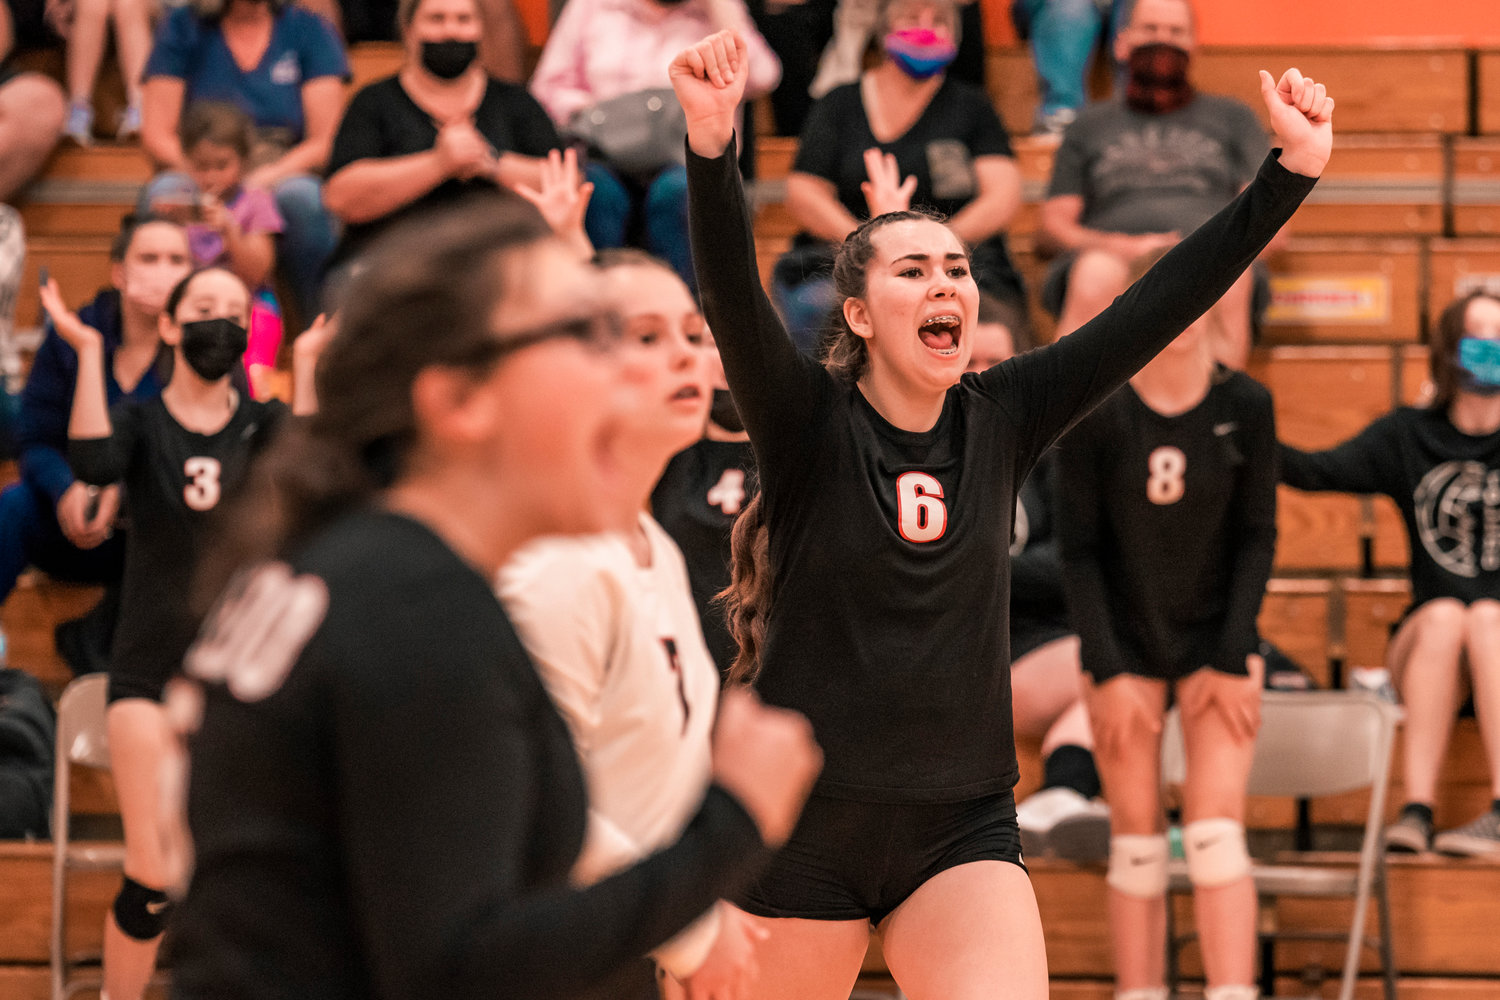 Toledo’s Stefa Arceo-Hansen (6) raises her arms and cheers following a score during a match against Napavine Tuesday night.